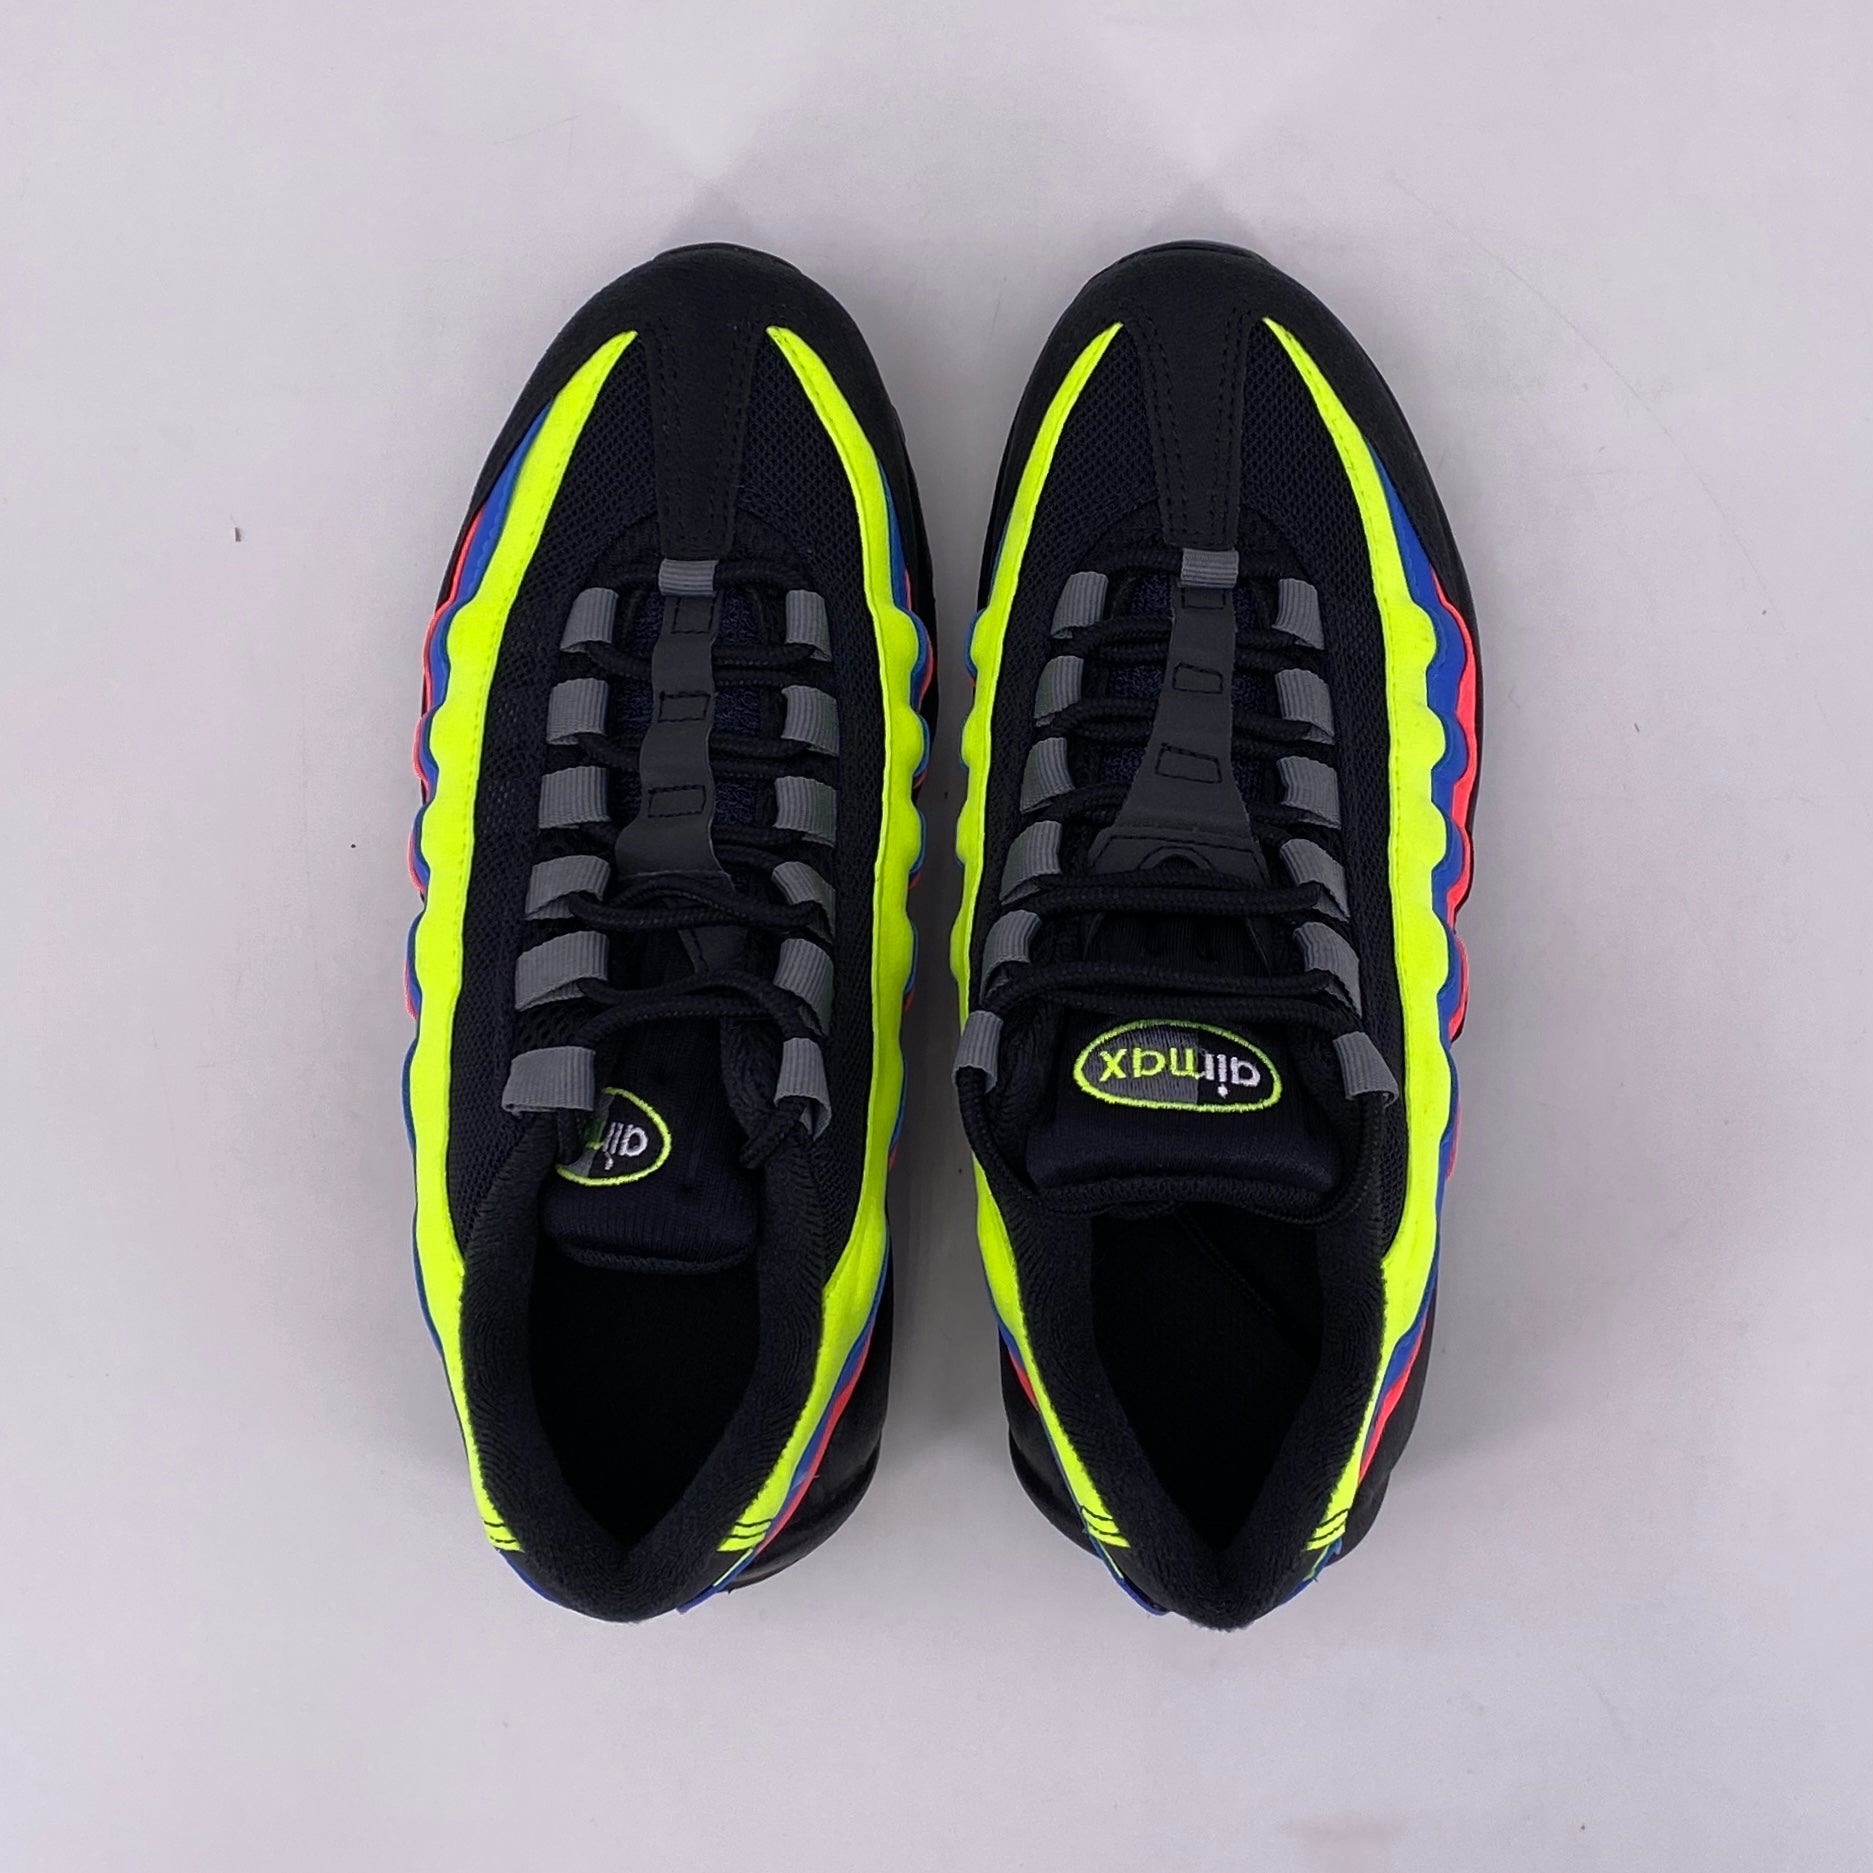 Nike (GS) Air Max 95 "Black Neon" 2022 New Size 5.5Y